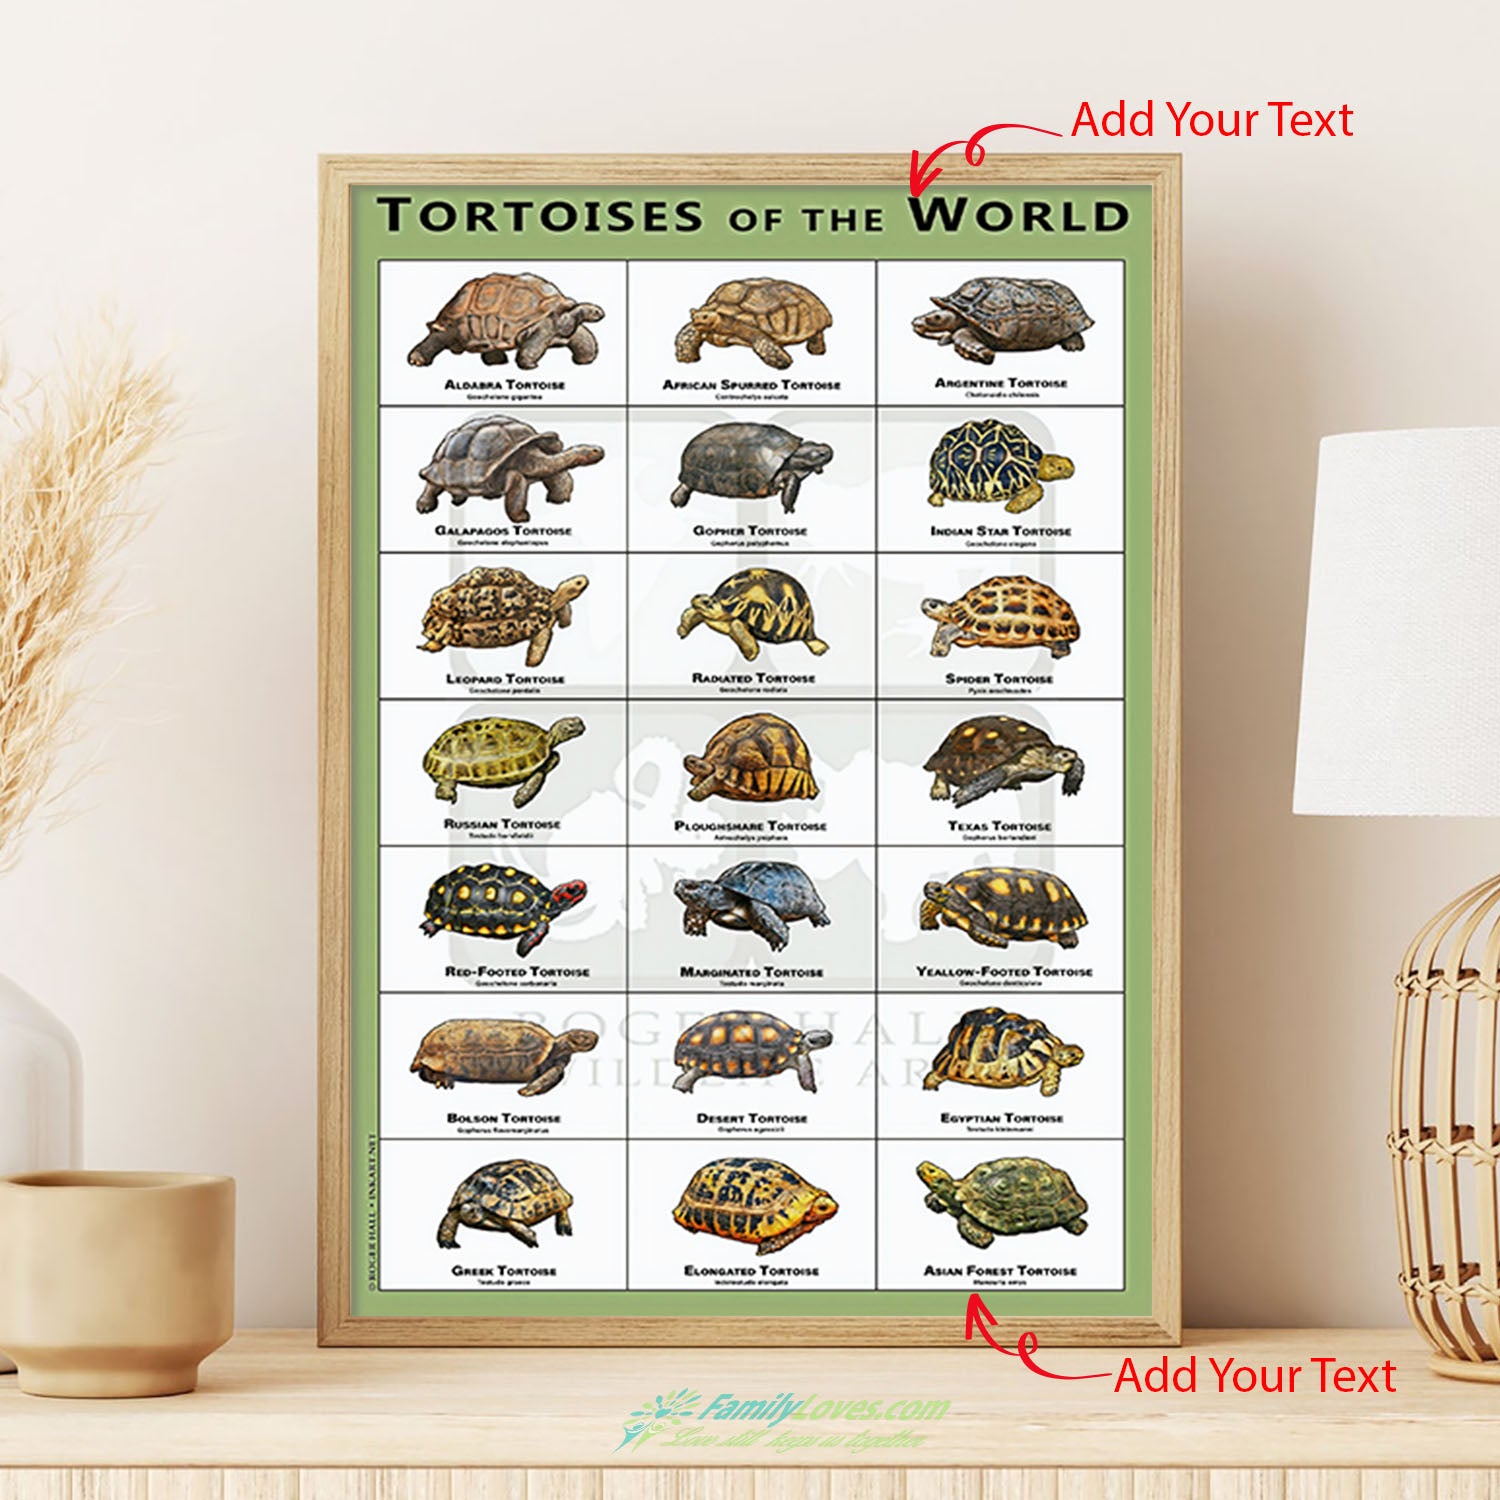 Tortoises Of The World Canvases For Painting Poster 36X24 All Size 1